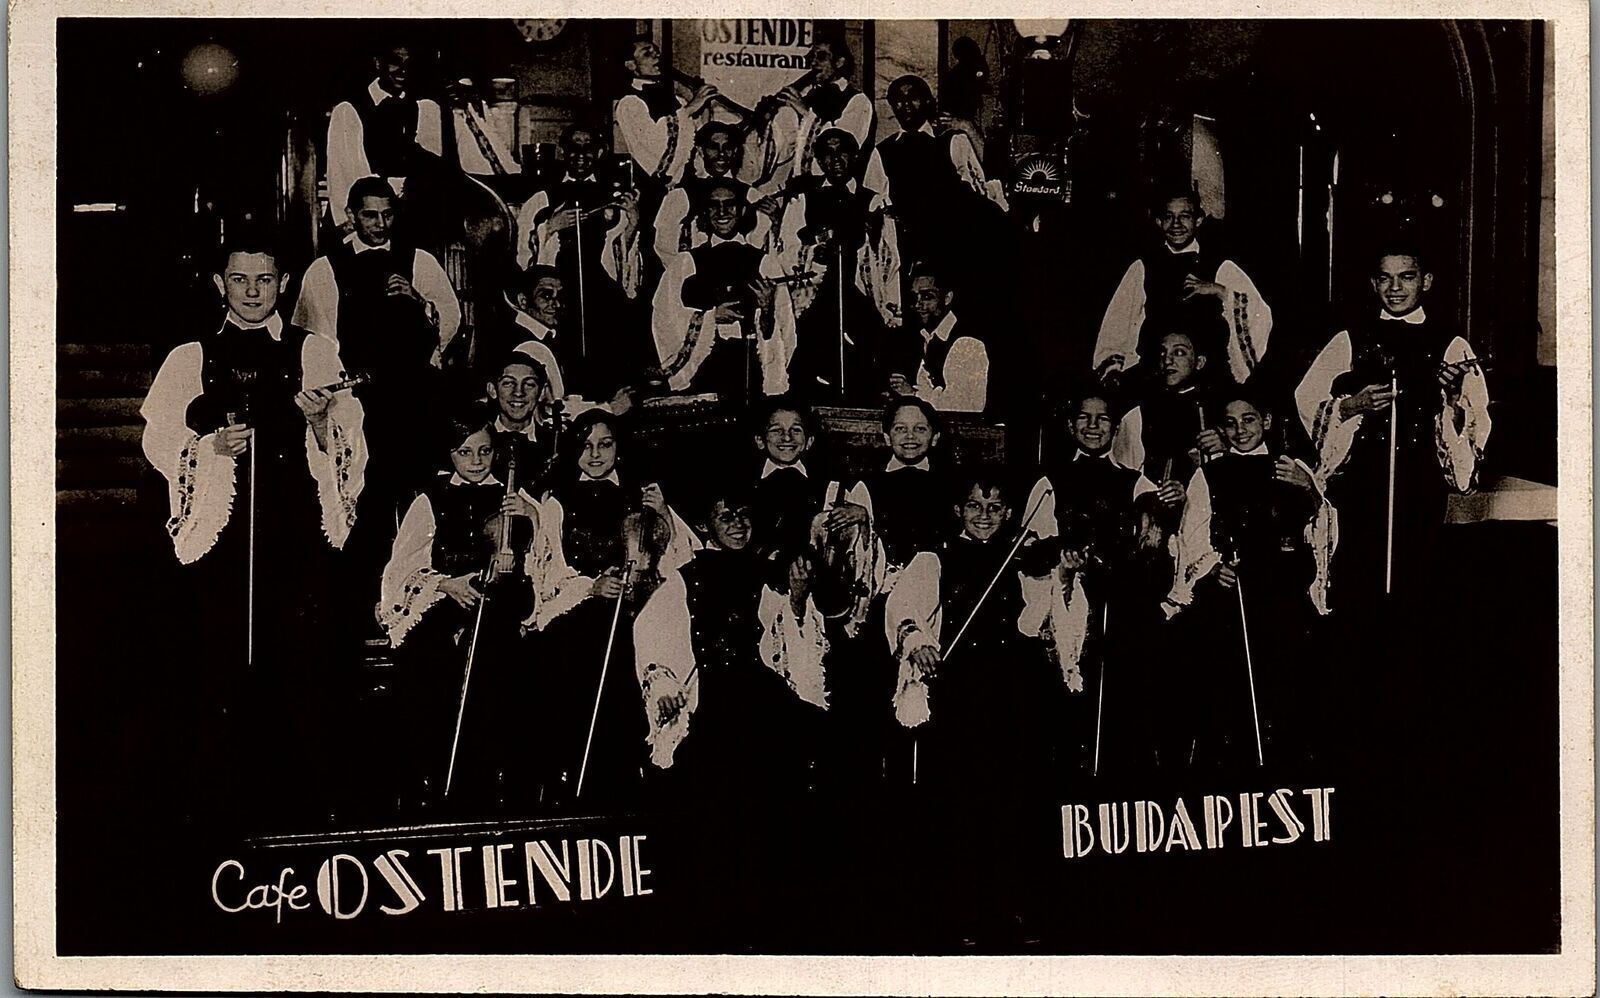 c1920 BUDAPEST HUNGARY CAFÉ OSTENDE BAND ORCHESTRA REAL PHOTO POSTCARD 39-165